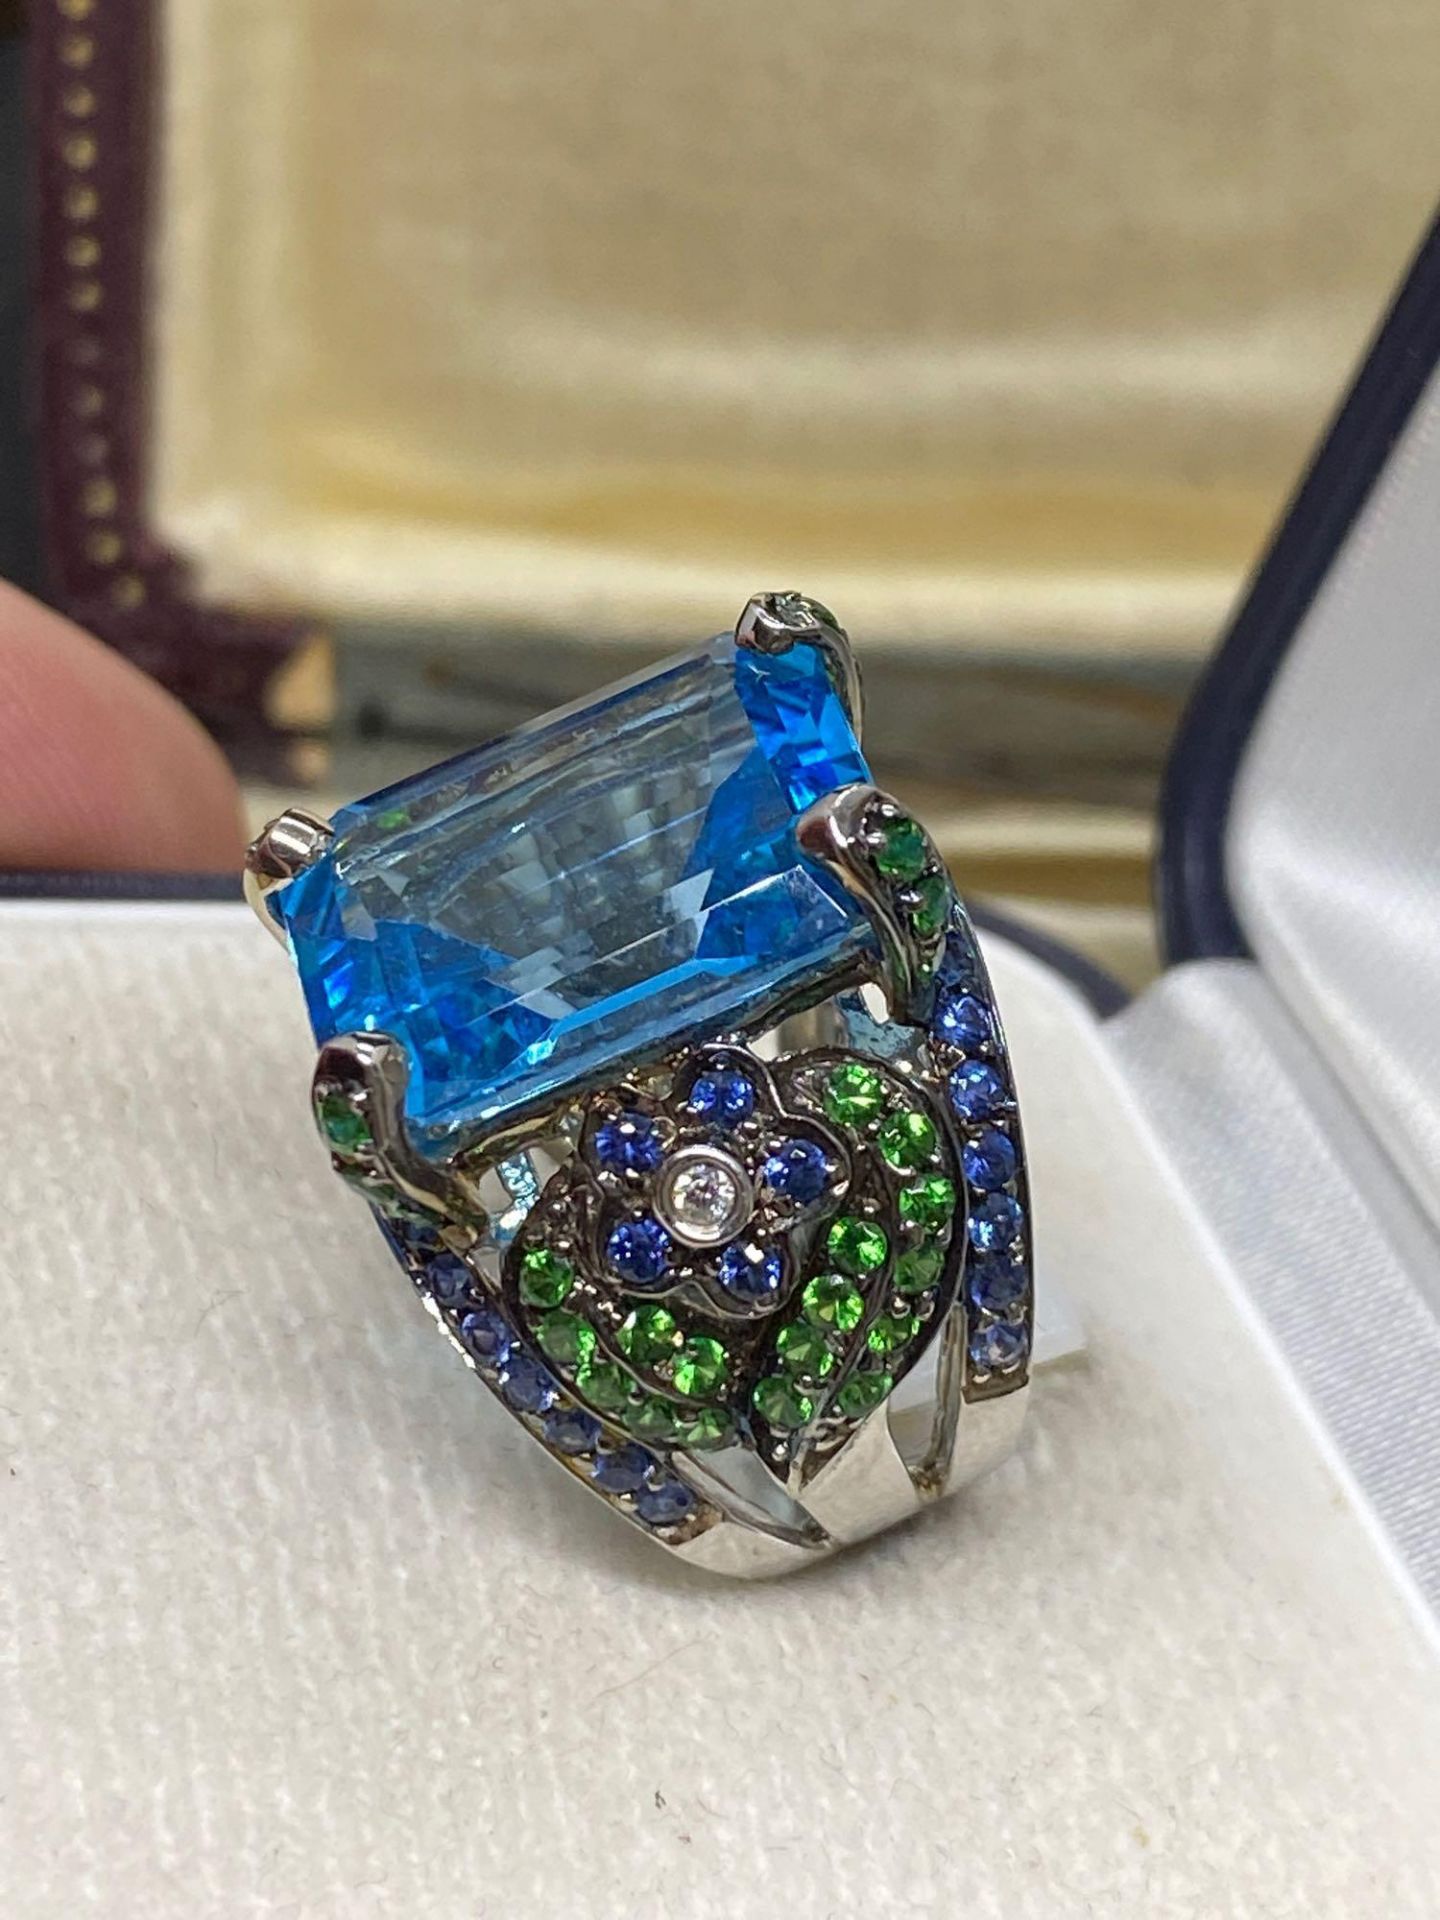 Fine 18ct Gold 10.00ct AA Blue Topaz with Sapphires, Diamonds etc - 11 Grams - Image 3 of 4